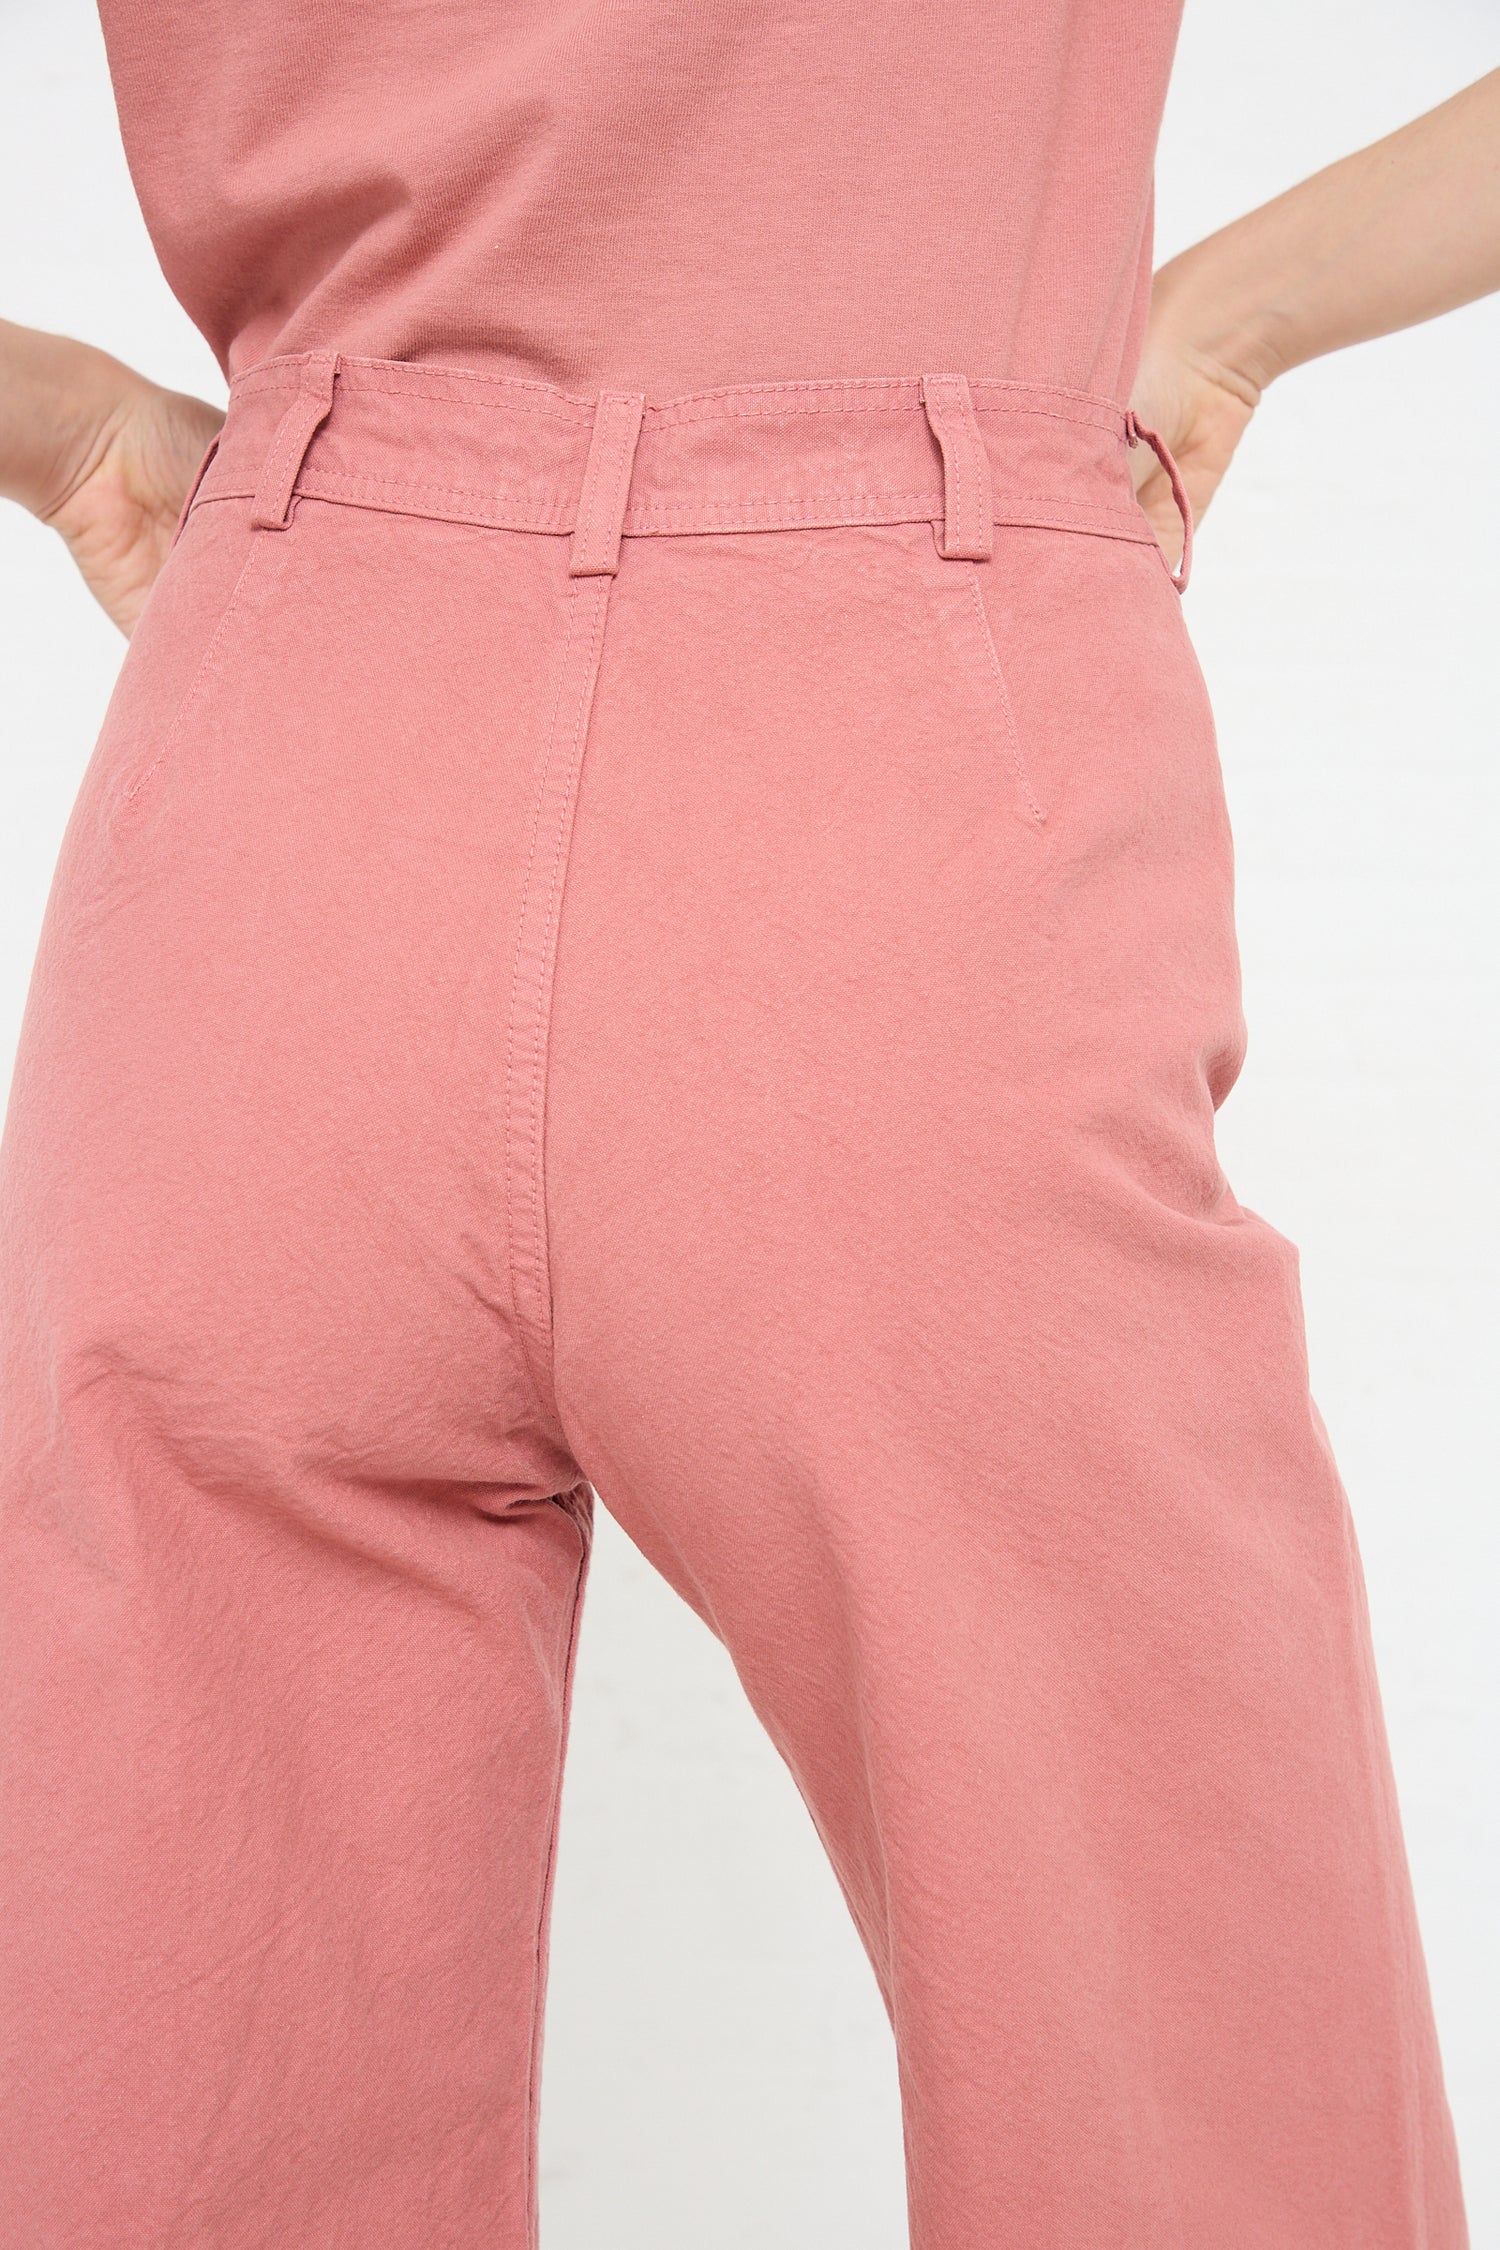 The woman is wearing pink Jesse Kamm Sailor Pants in Dogwood.